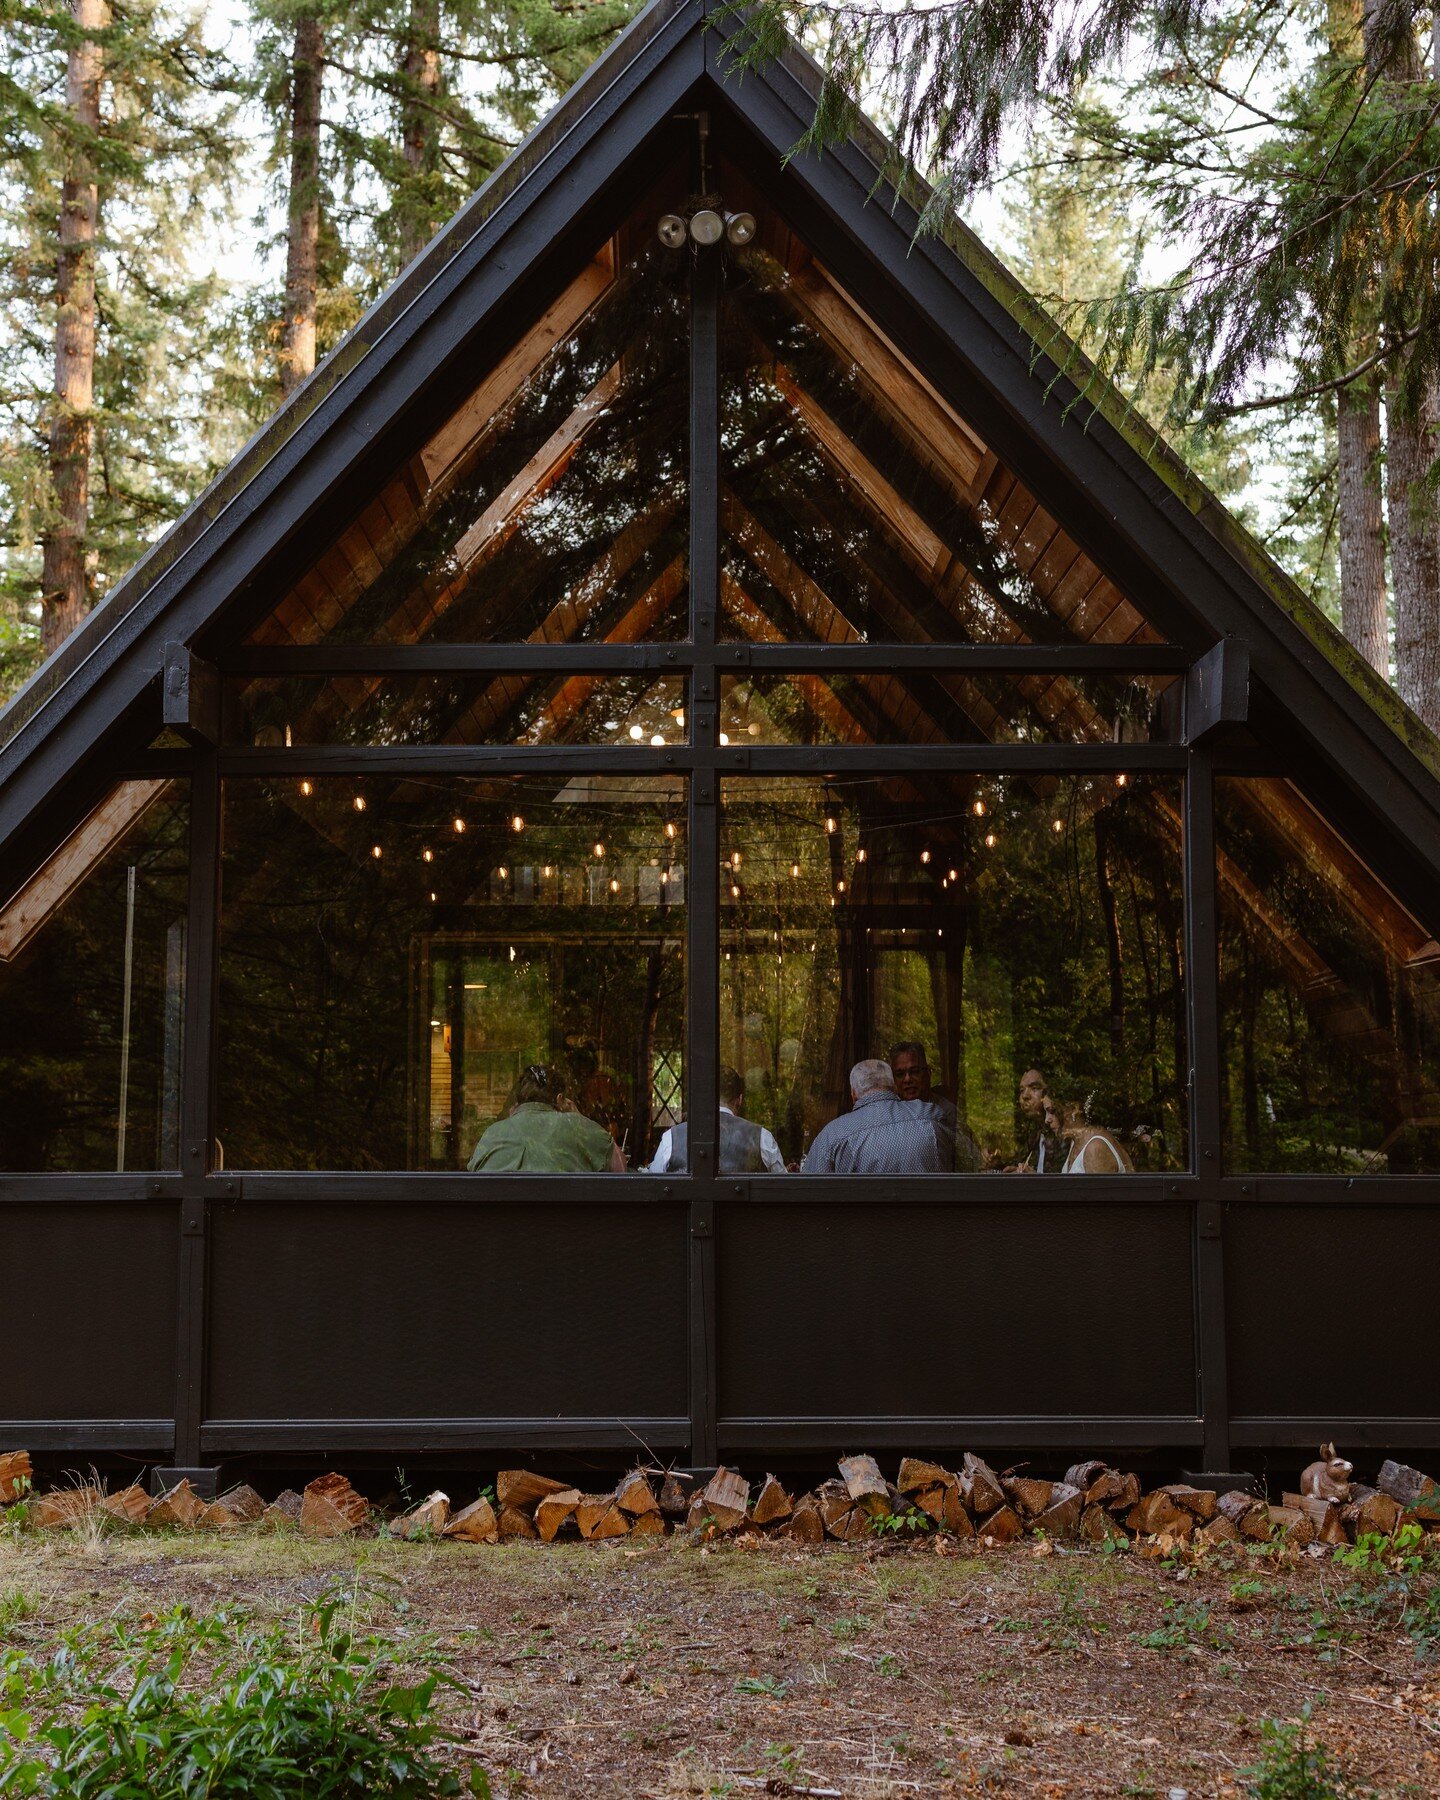 If you're thinking of having a smaller, more intimate wedding, consider finding an AirBnB or VRBO that allows having guests to have your ceremony &amp;/or reception in! There are so many hidden gems like this lovely cabin in the woods where couples a